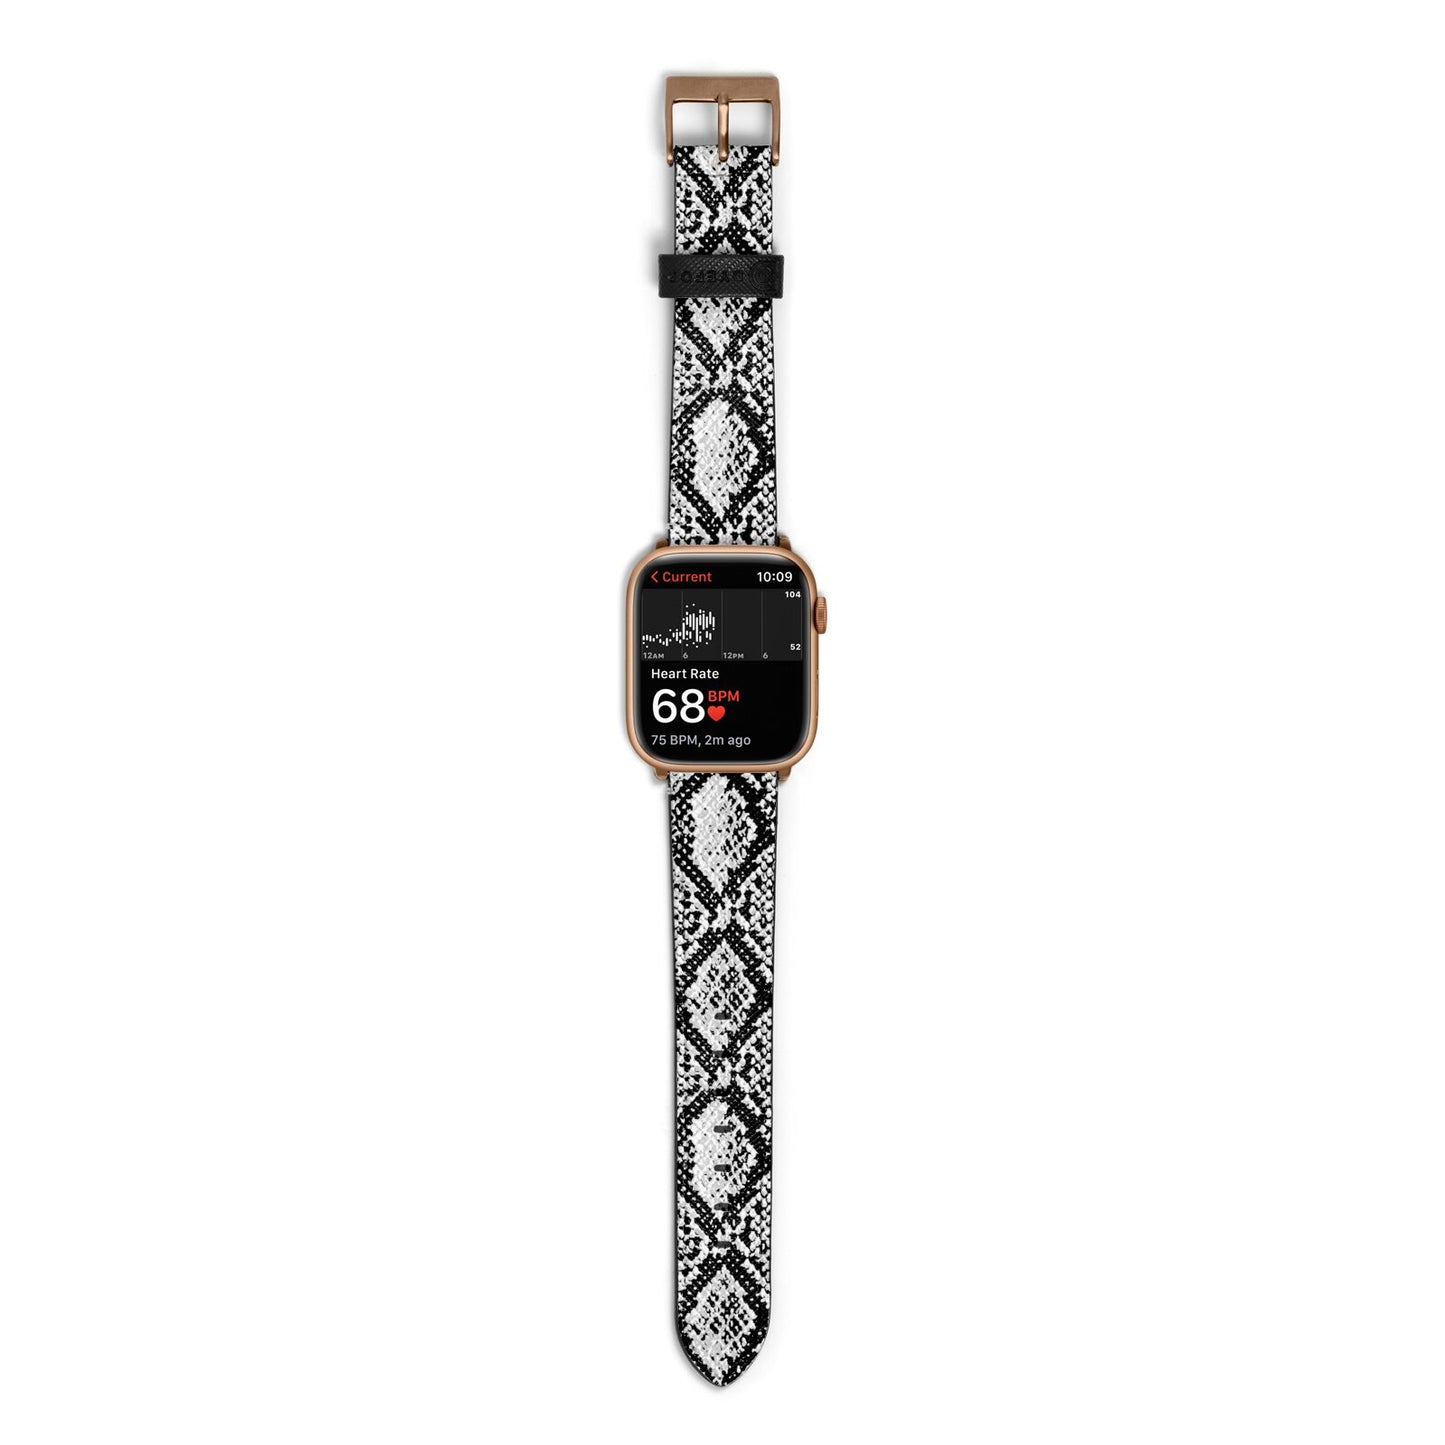 Black Snakeskin Apple Watch Strap Size 38mm with Gold Hardware